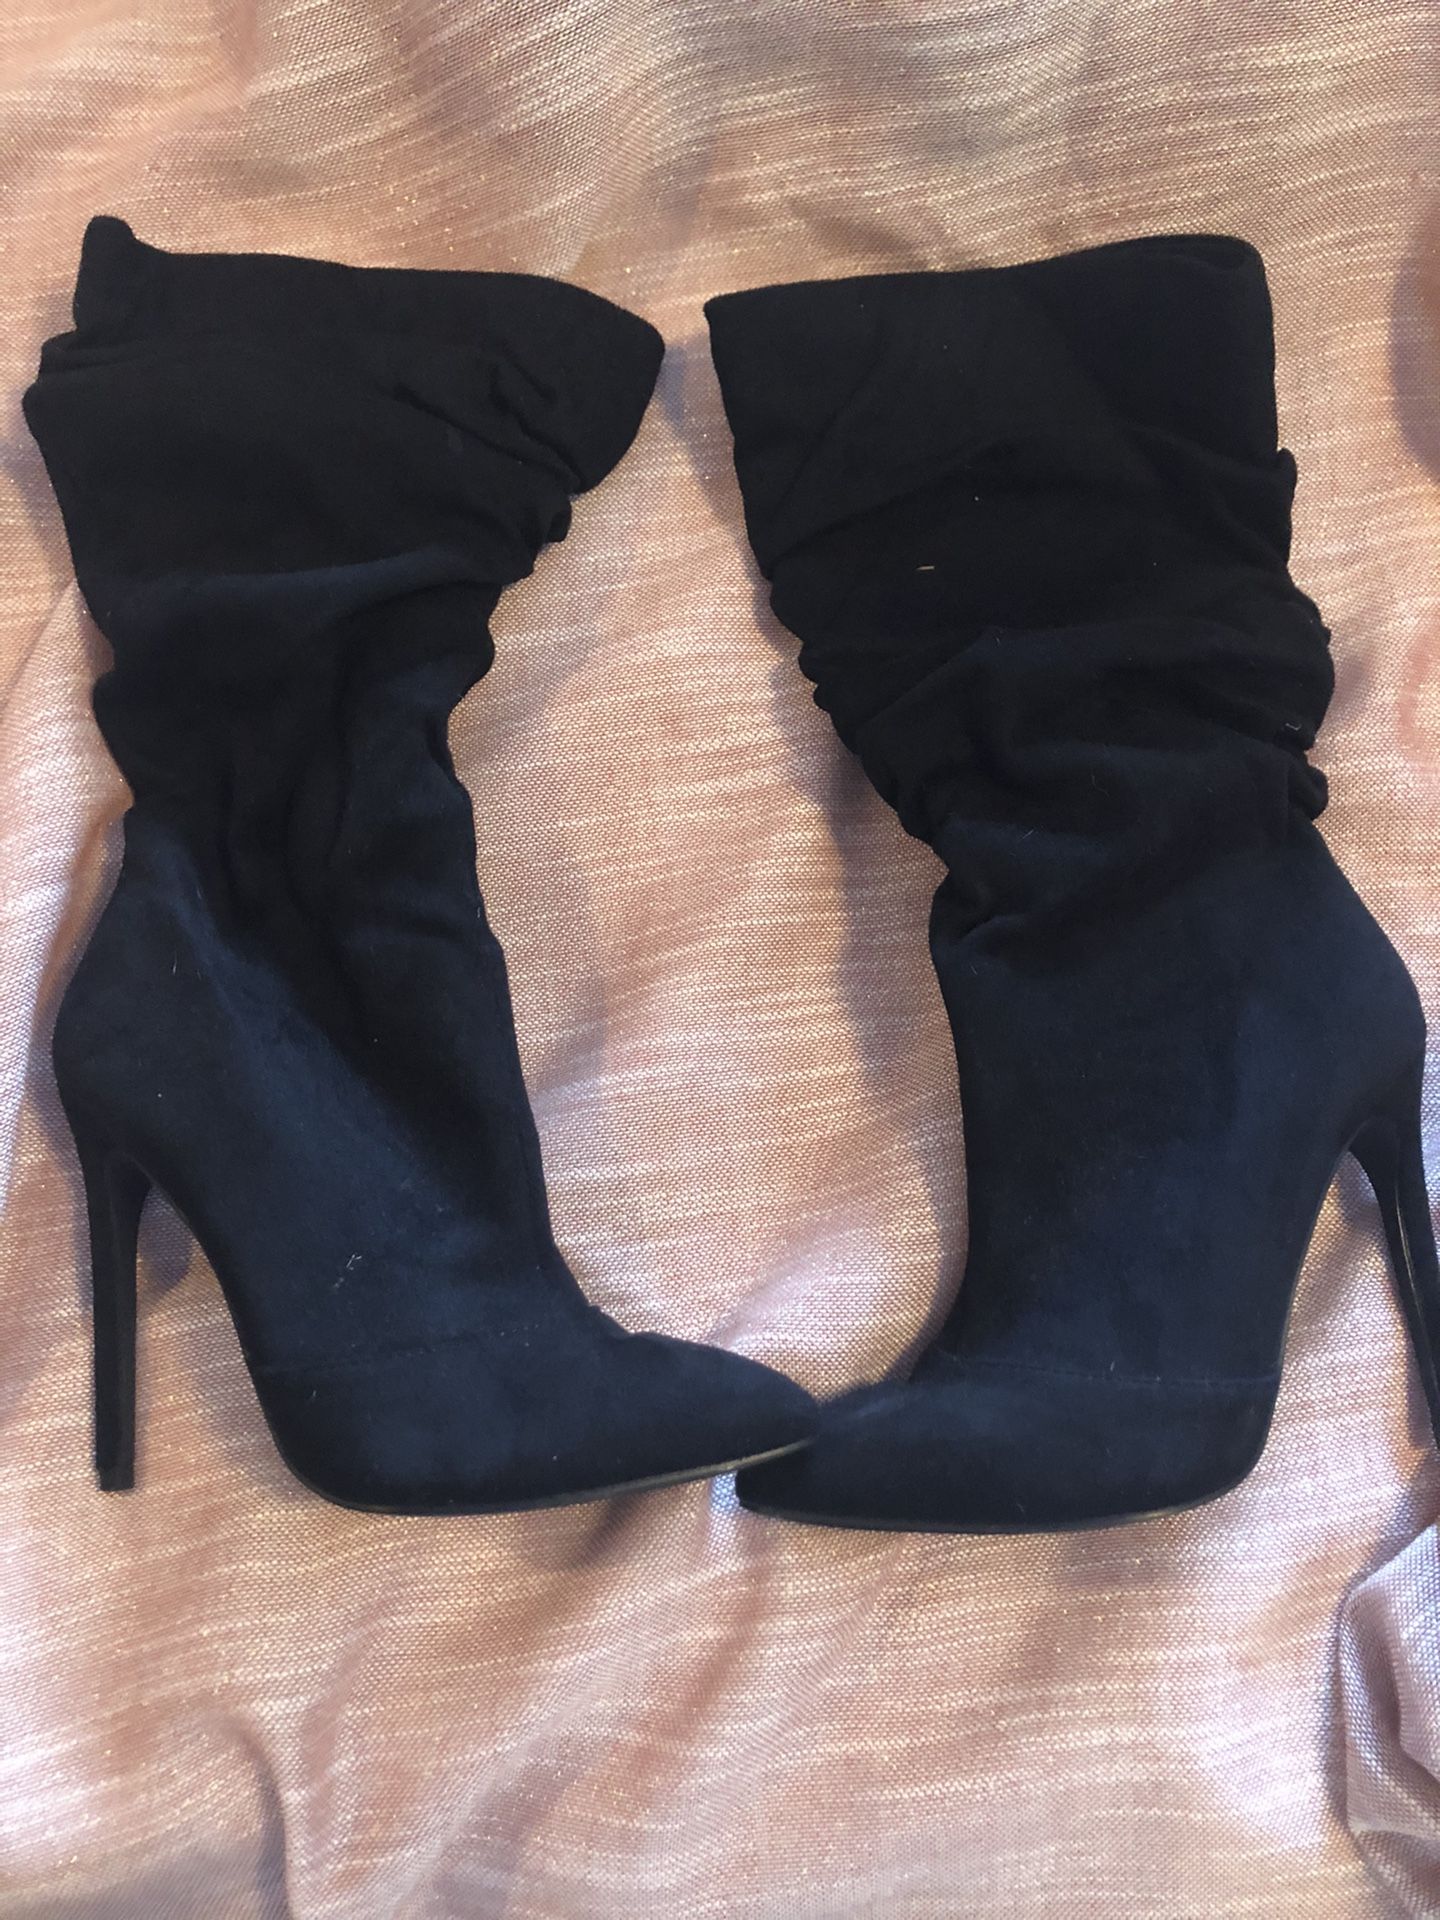 Size 6 black suede boots